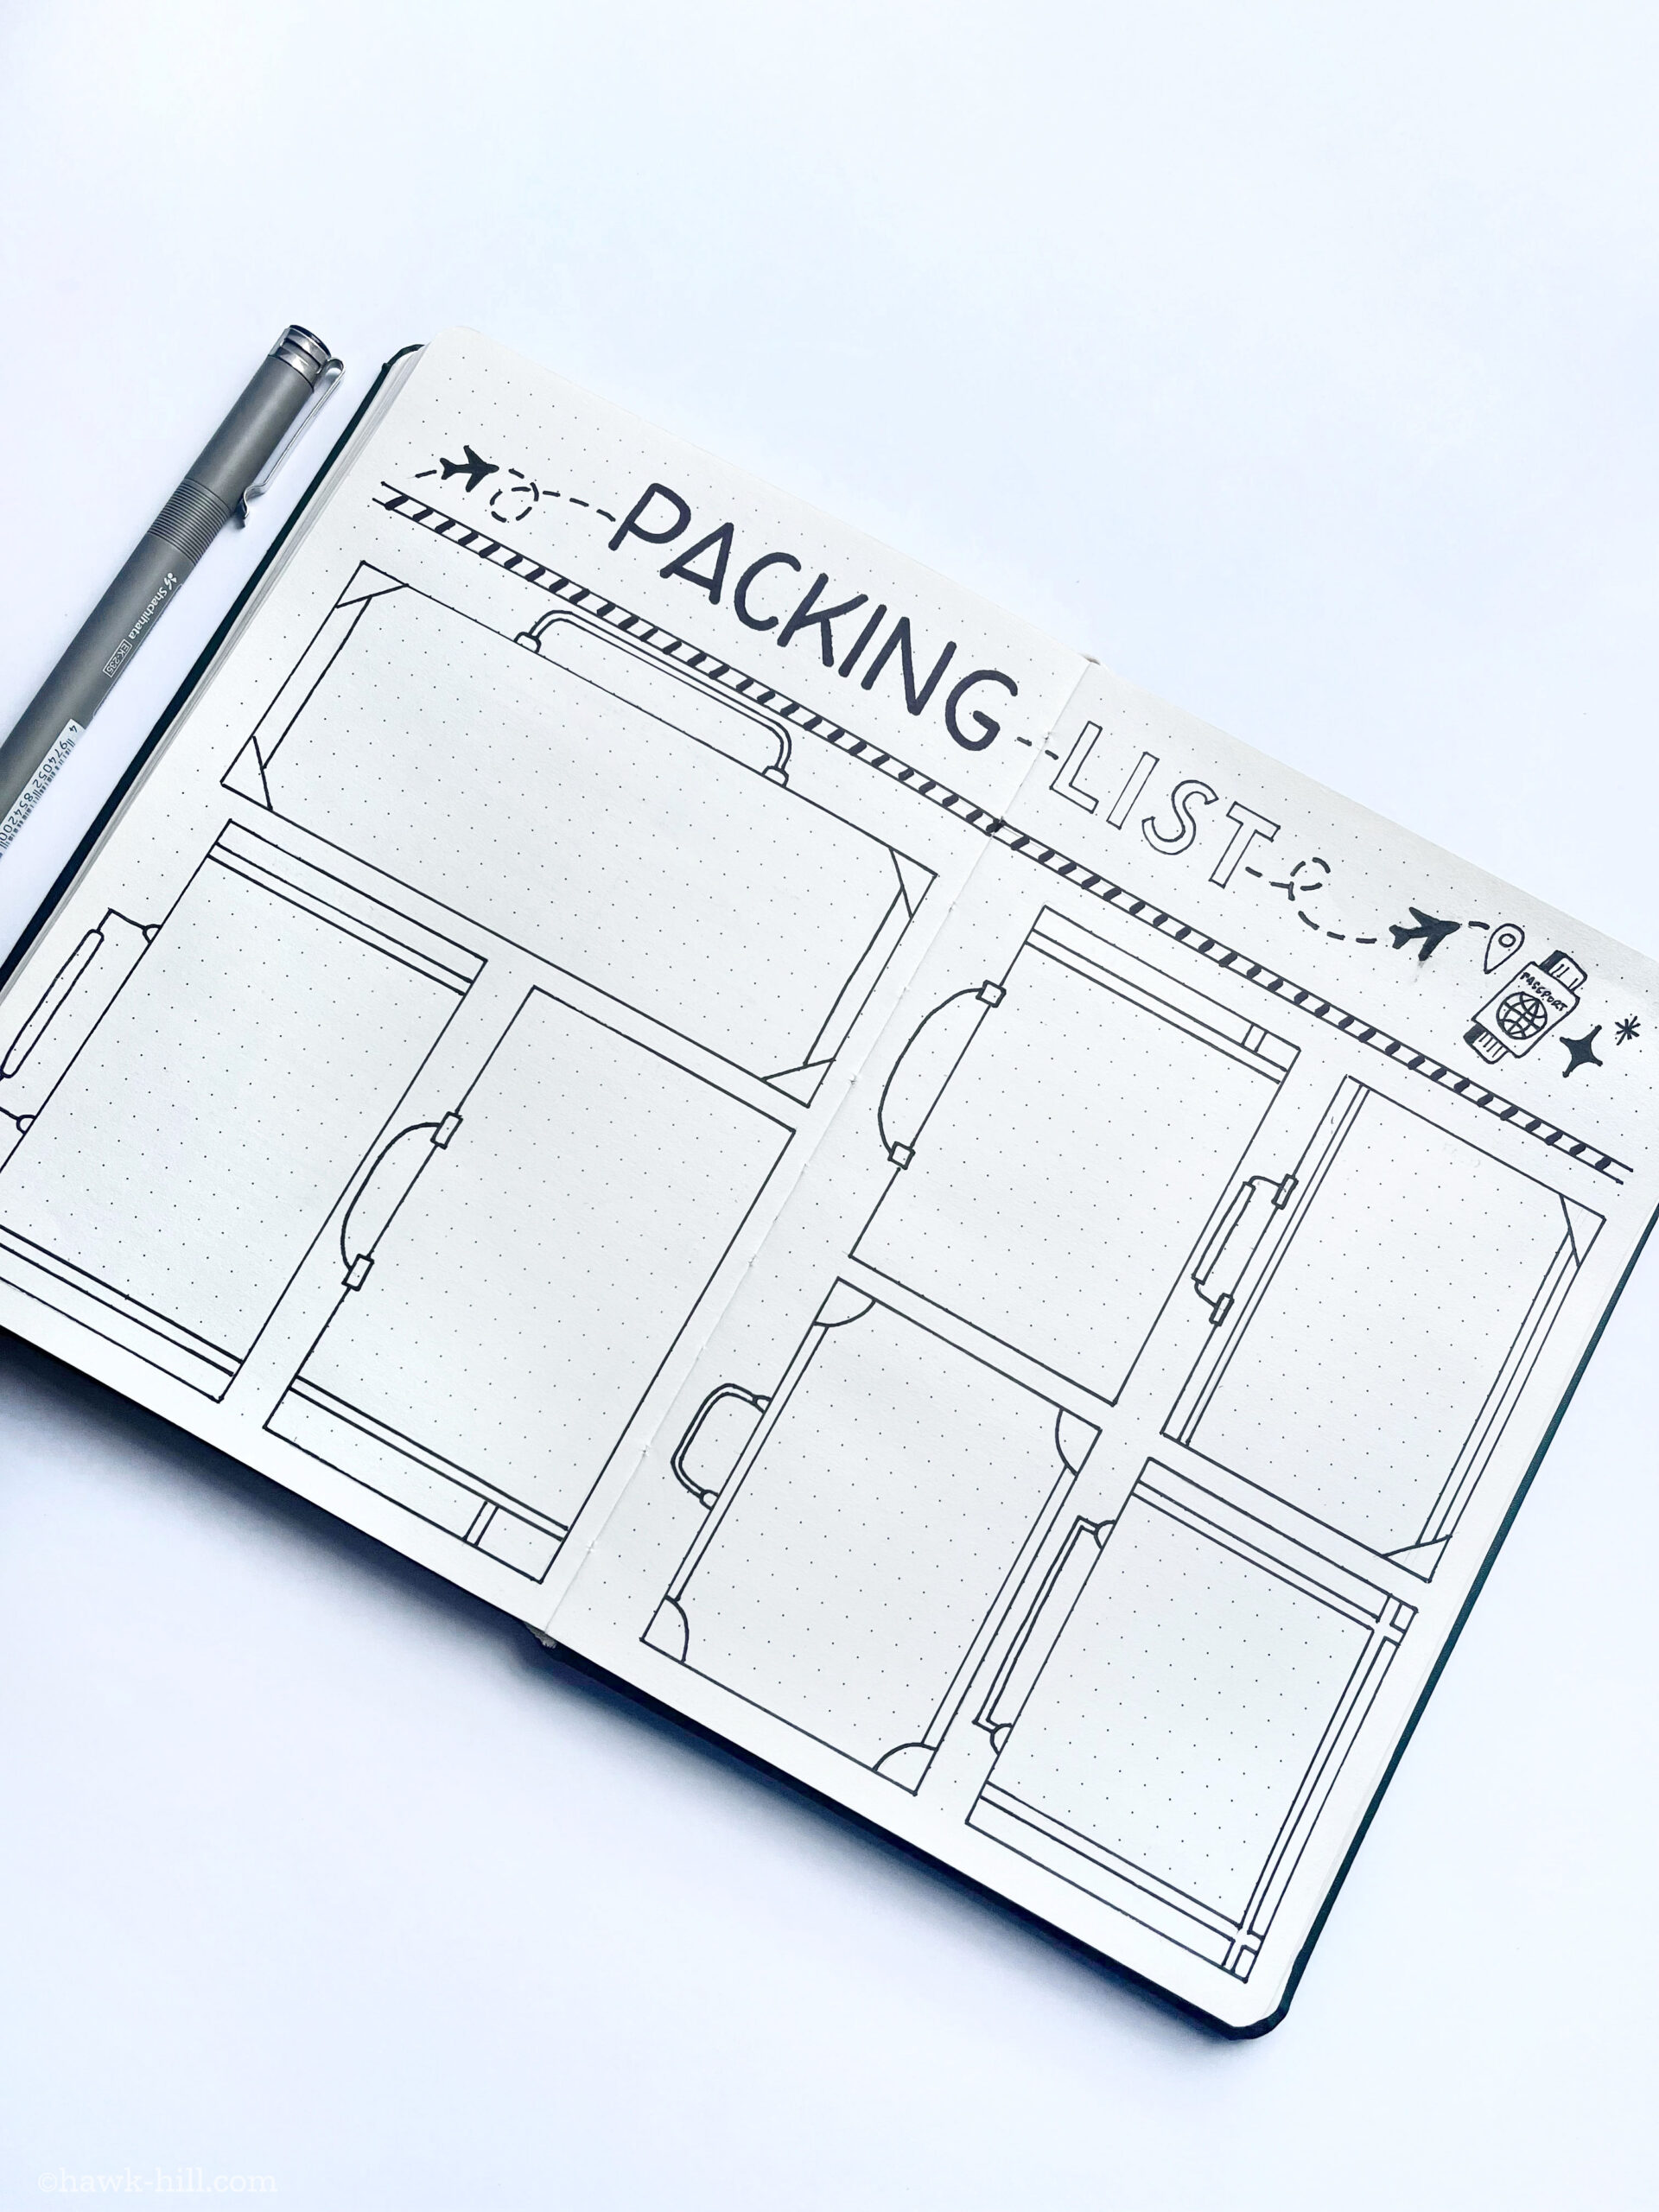 packing list bullet journal layout being drawn in ink on a page.